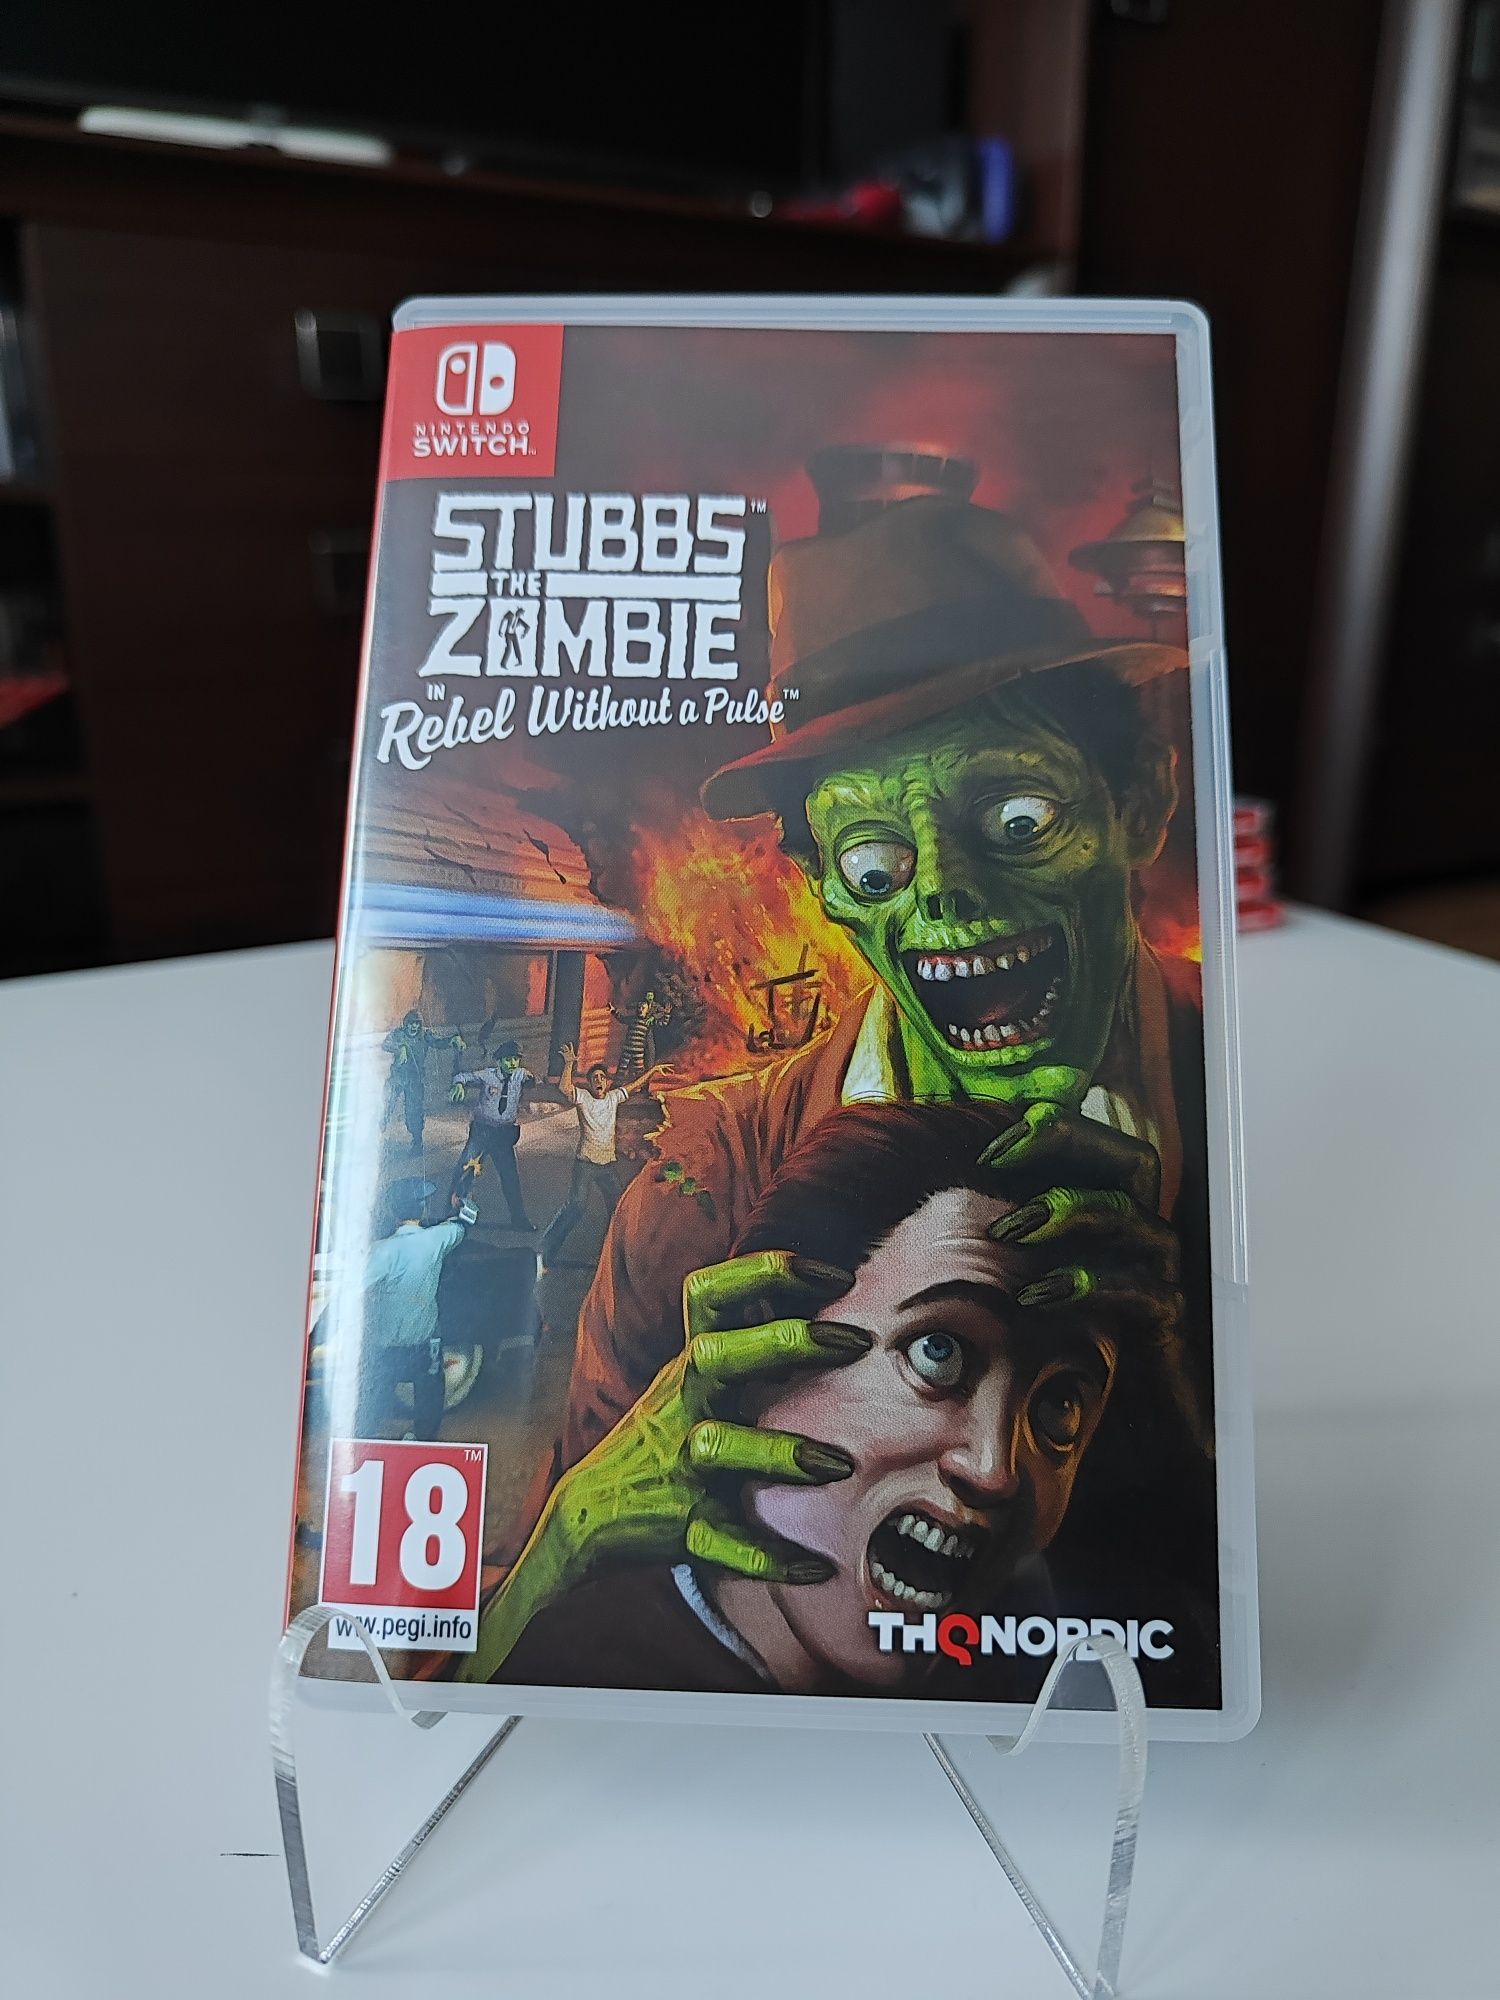 Stubbs The Zombie in Rebel Without a Pulsem Nintendo Switch